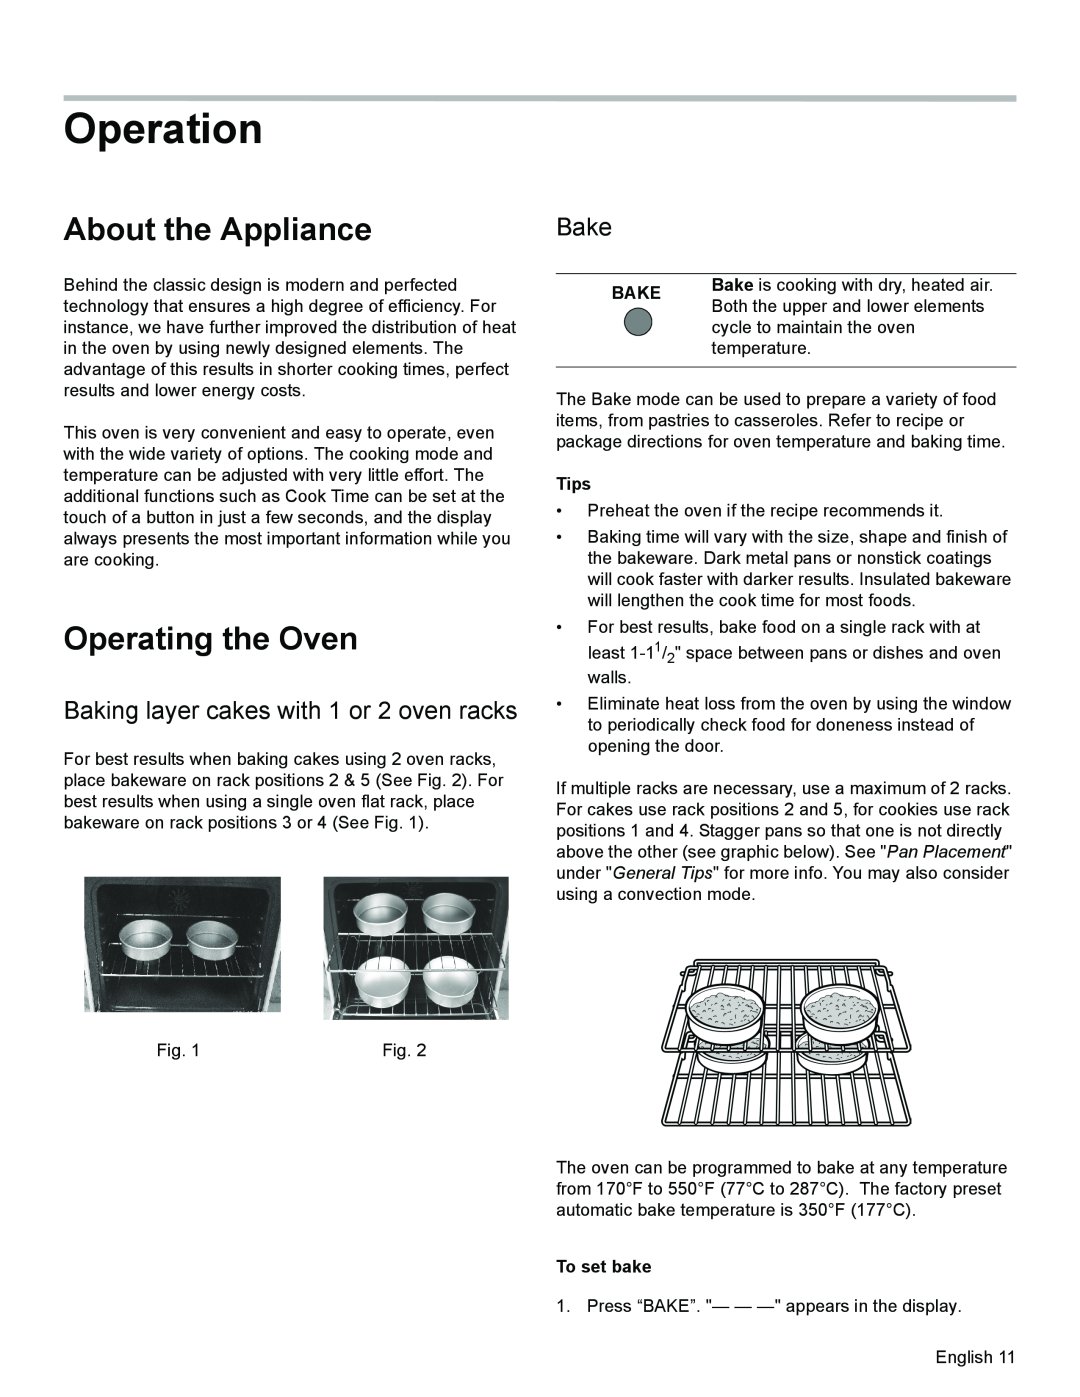 Bosch Appliances HES3053U Operation, About the Appliance, Operating the Oven, Baking layer cakes with 1 or 2 oven racks 